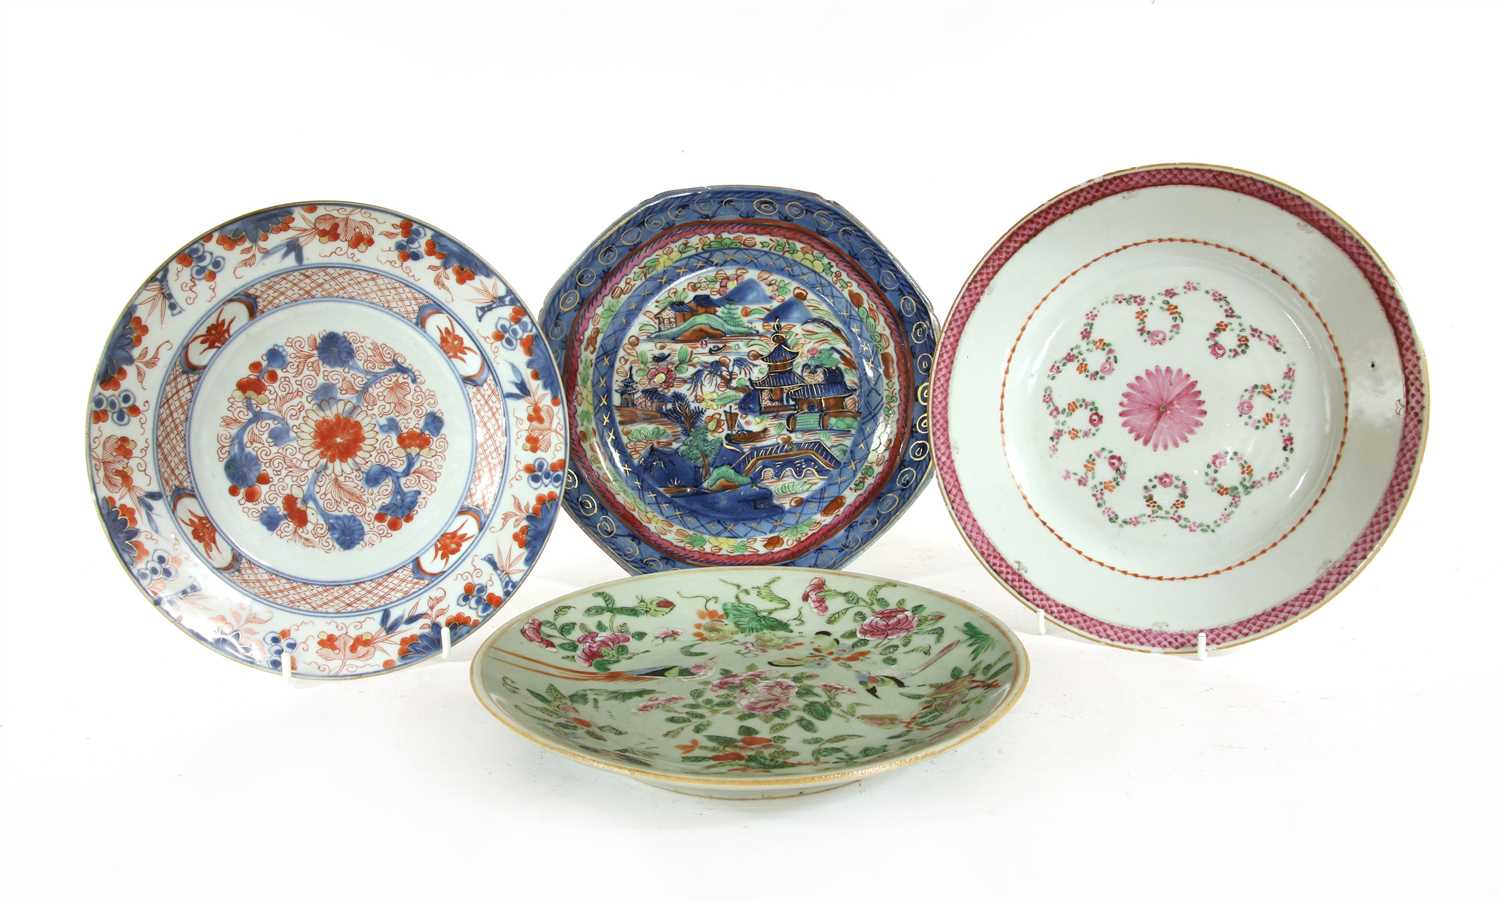 Lot 393 - A Chinese export porcelain Imari plate